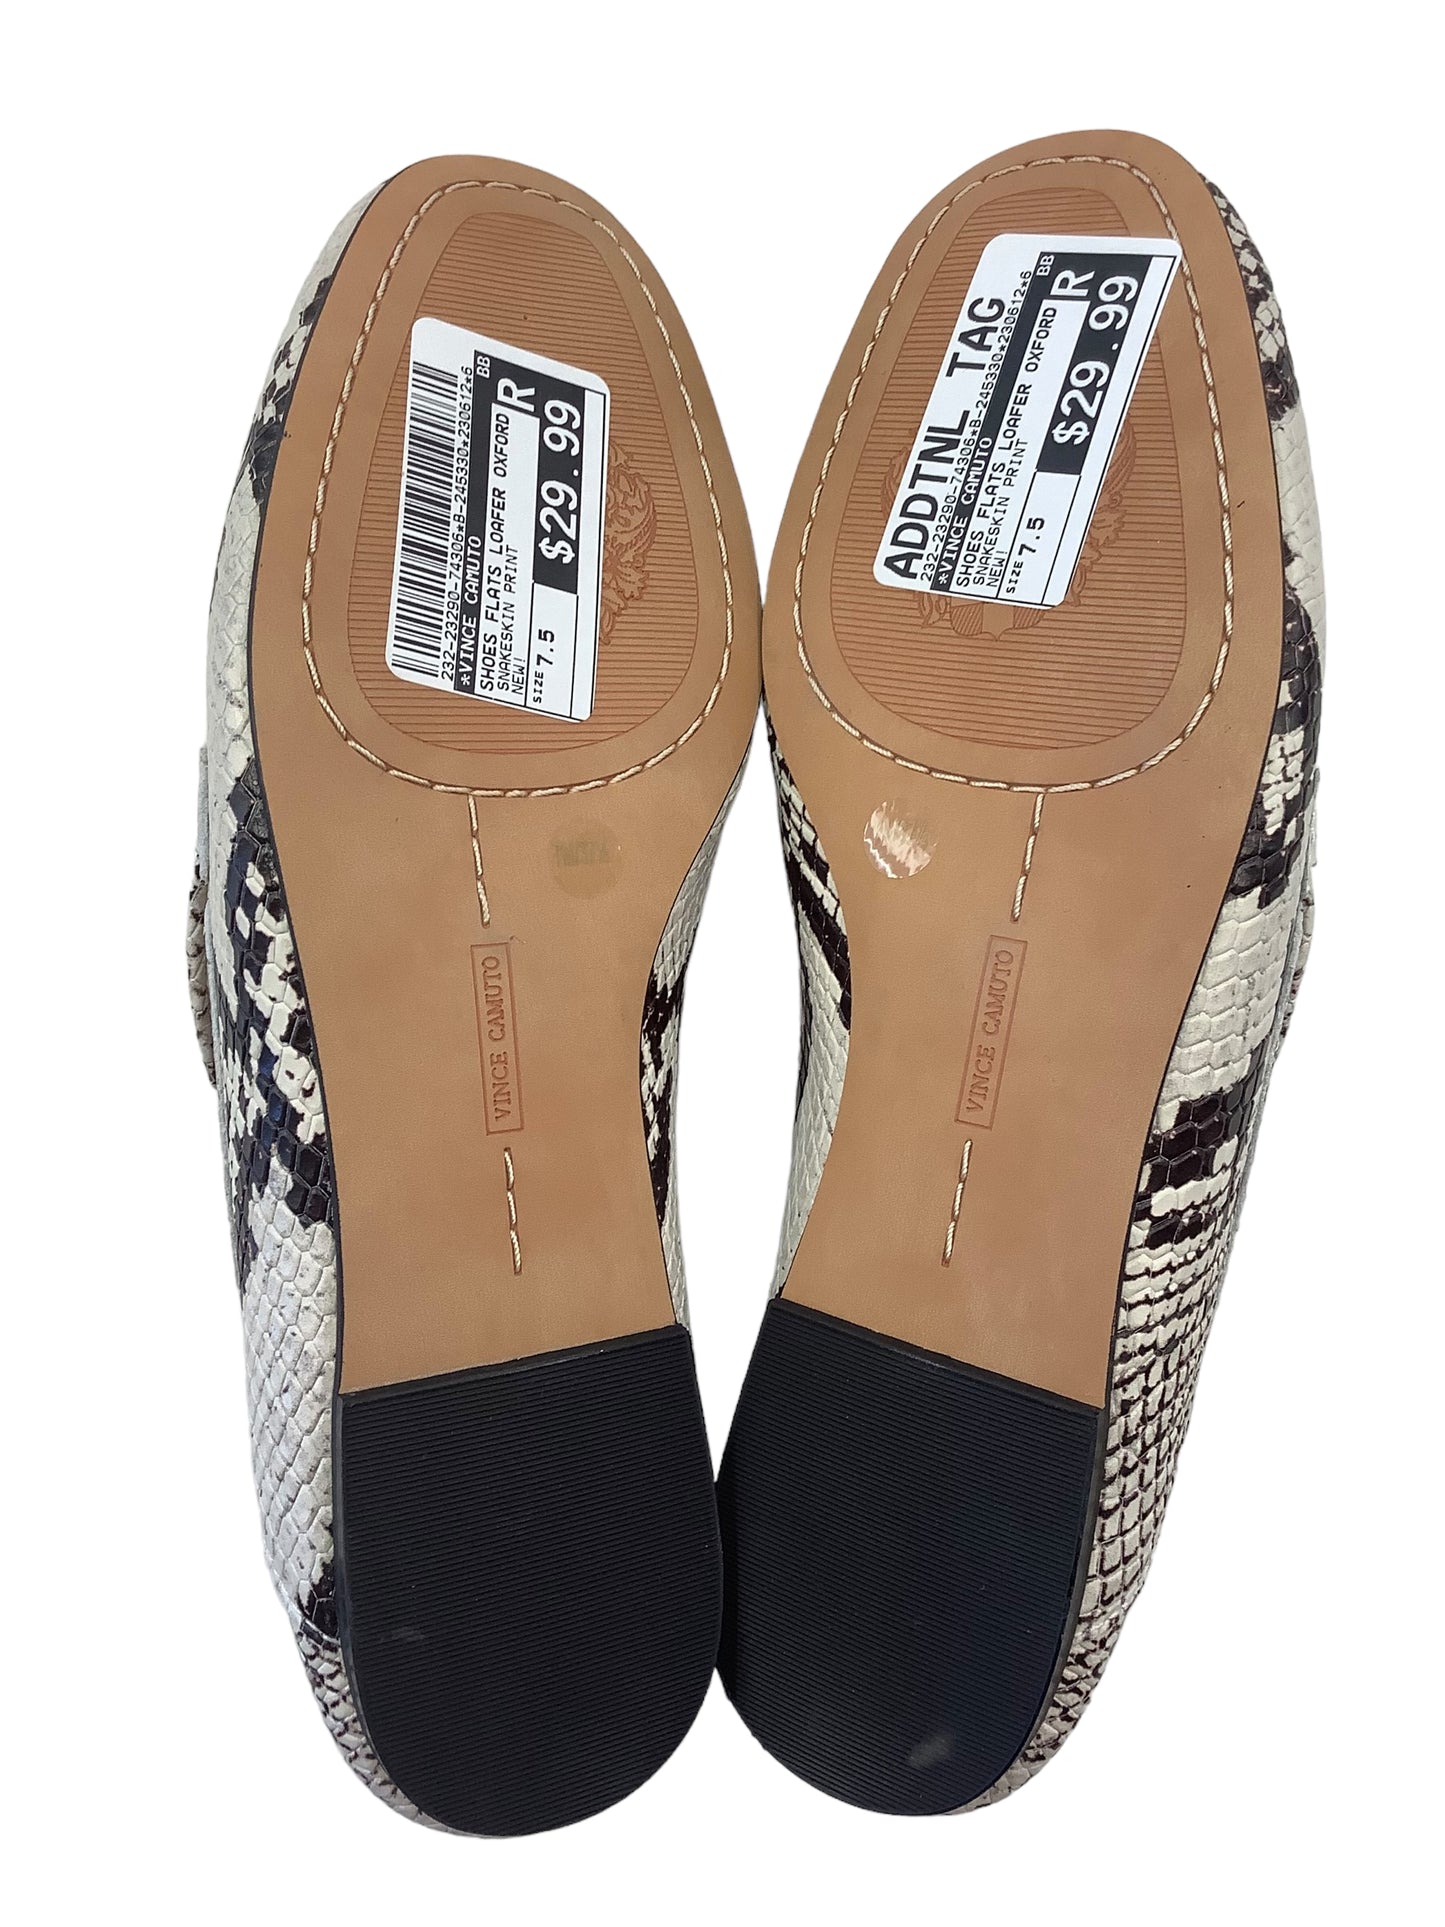 Shoes Flats Loafer Oxford By Vince Camuto  Size: 7.5